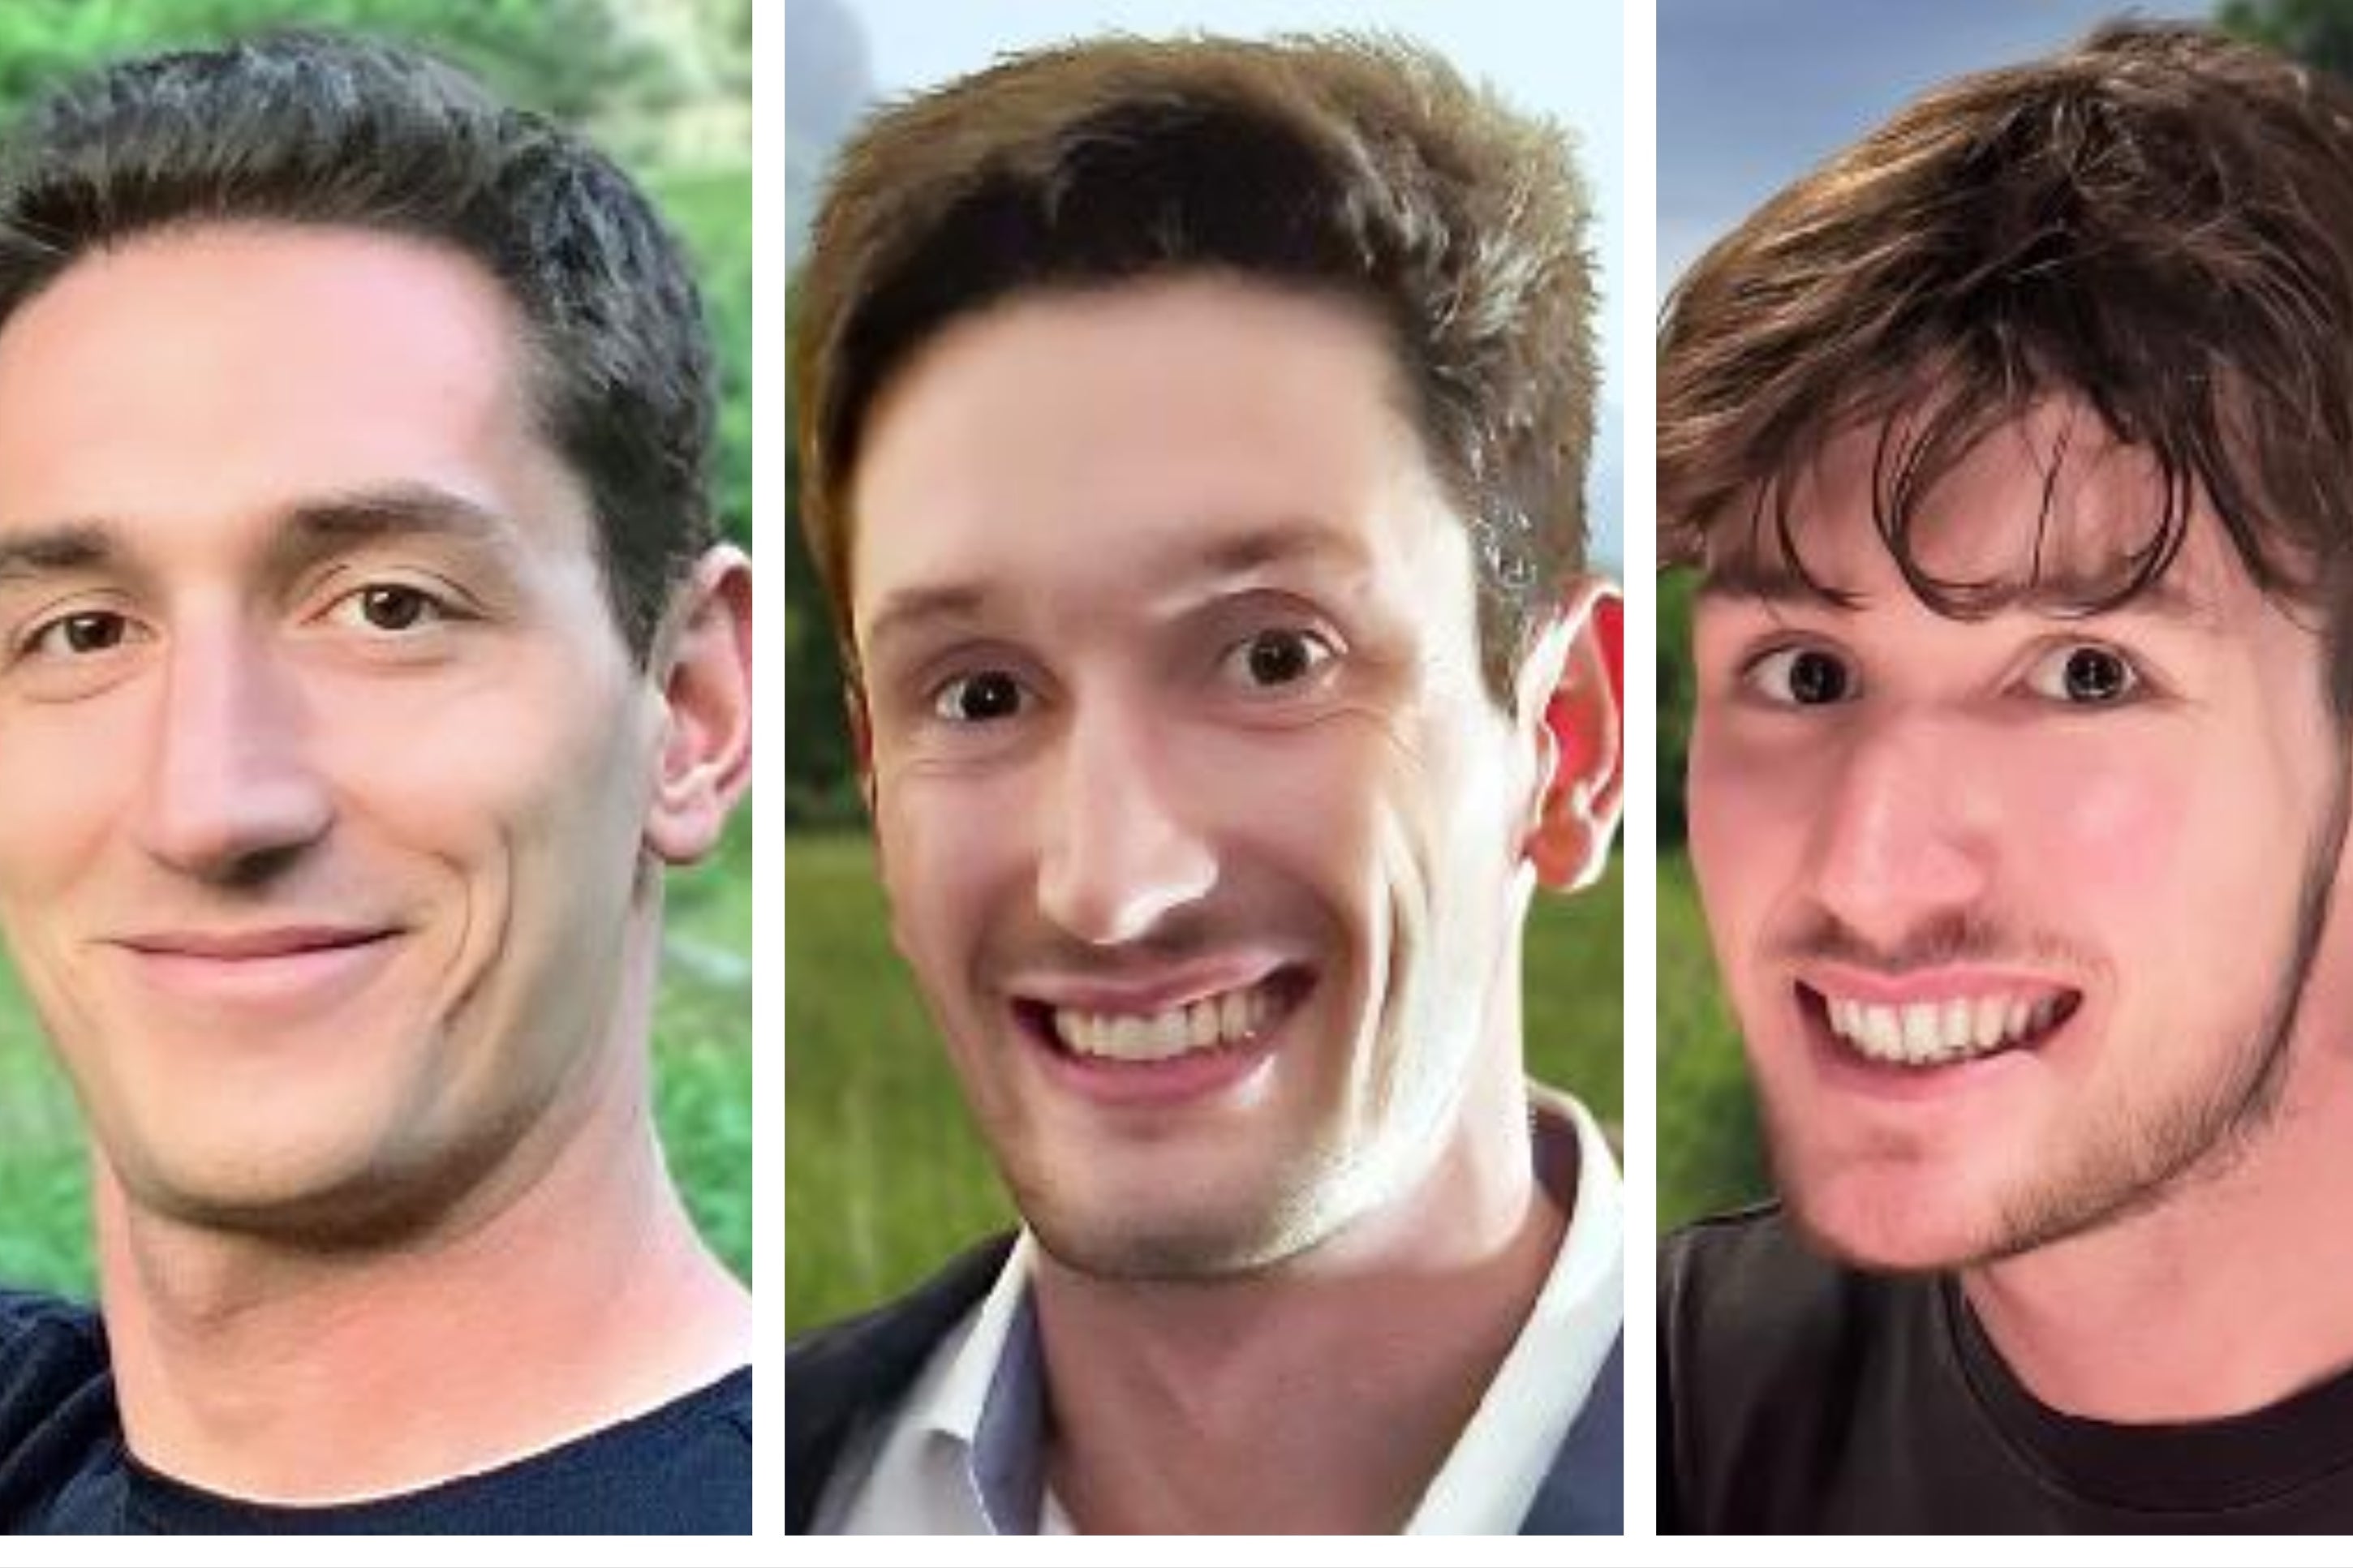 Brothers Jean-Vincent, David and Laurent Moix all perished in the Alps